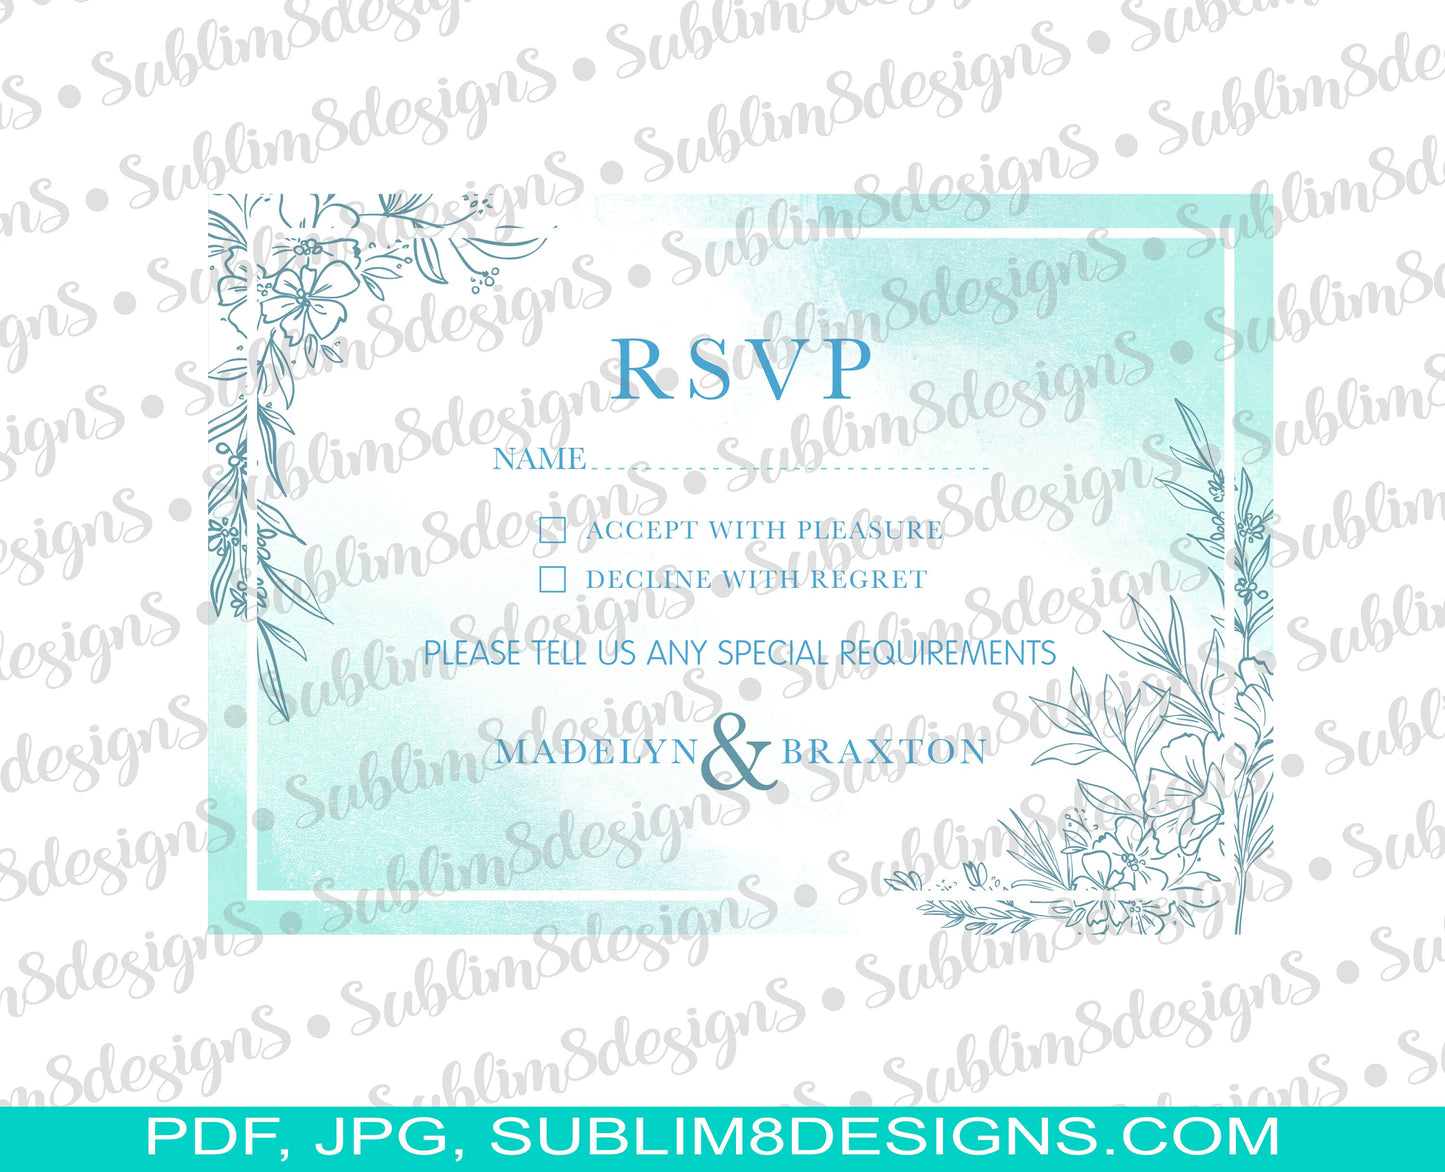 Teal Watercolor Wedding Invitation, RSVP Card, Thank you card, Table Card, Remember the Date, Digital Design PDF, PNG and Jpg